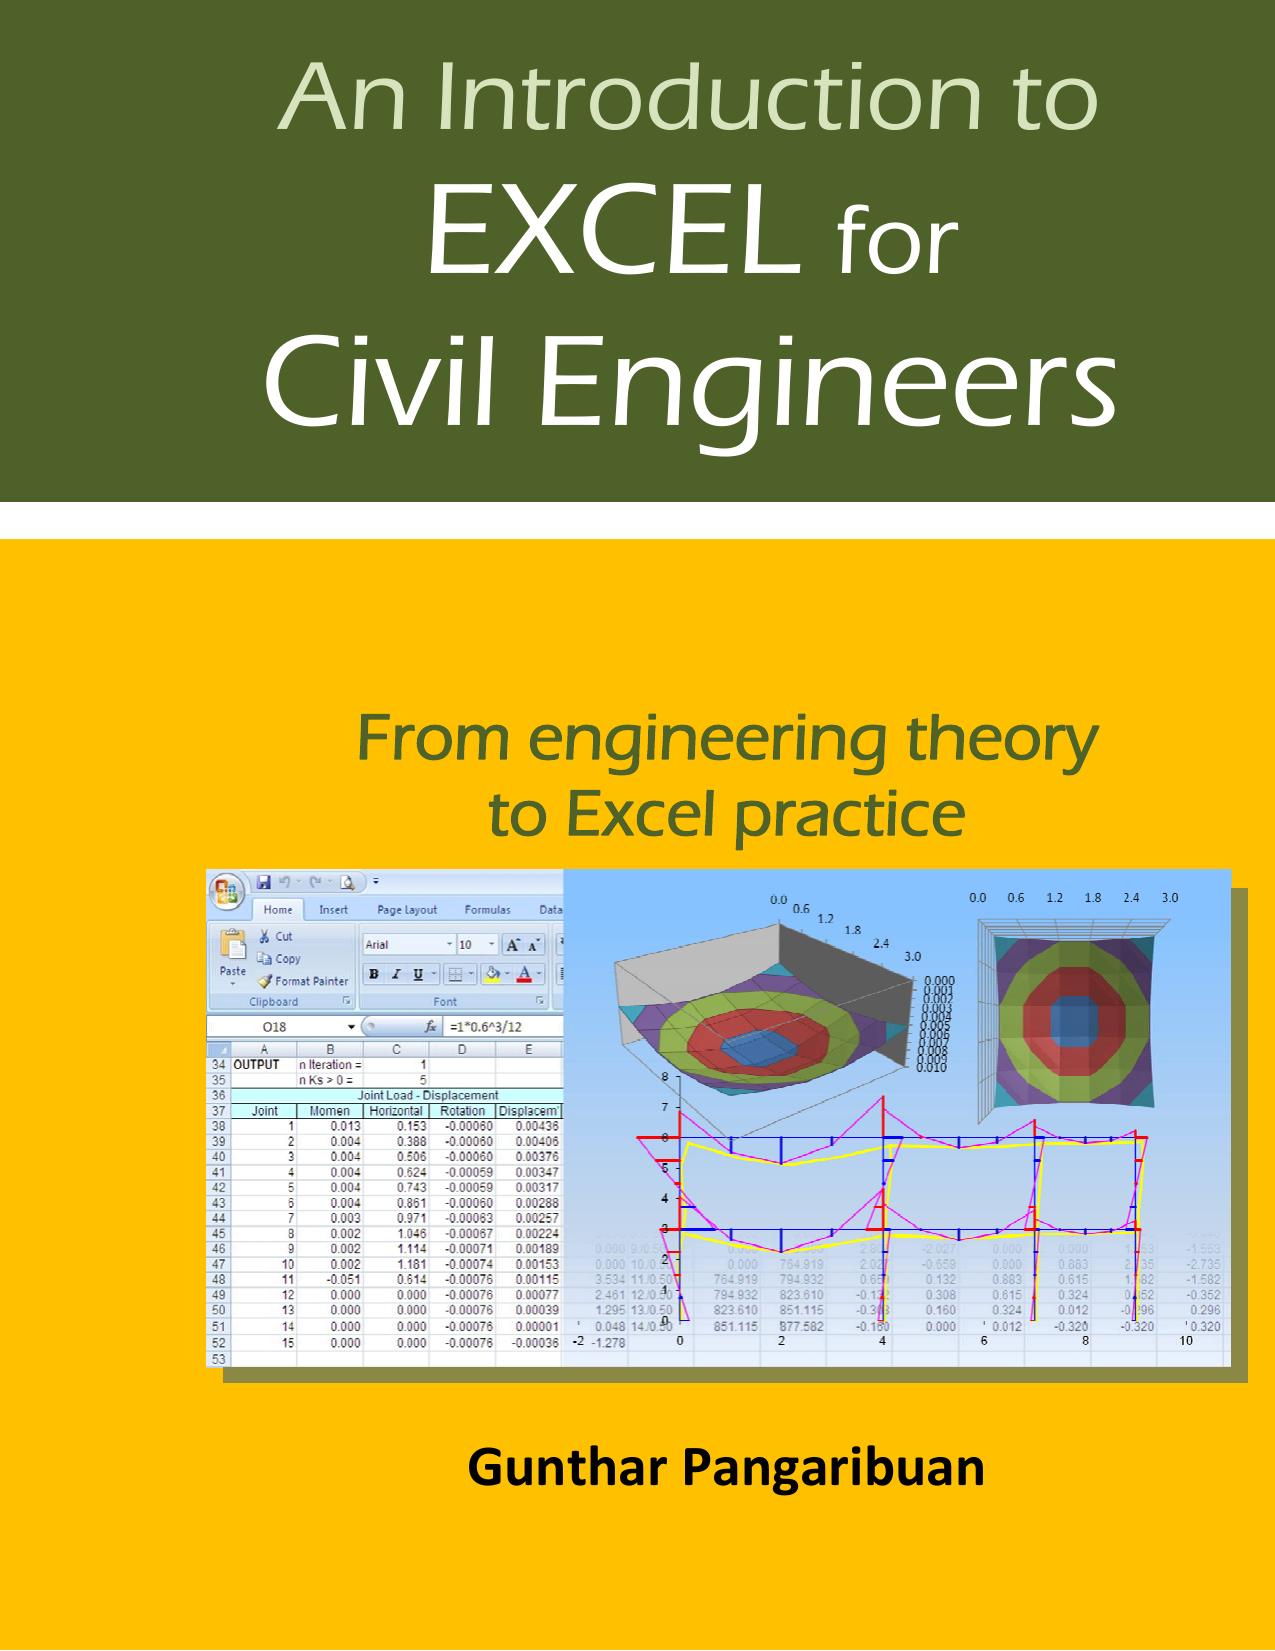 Microsoft Word - KDP_Book Excel for Civil Engineers.docx